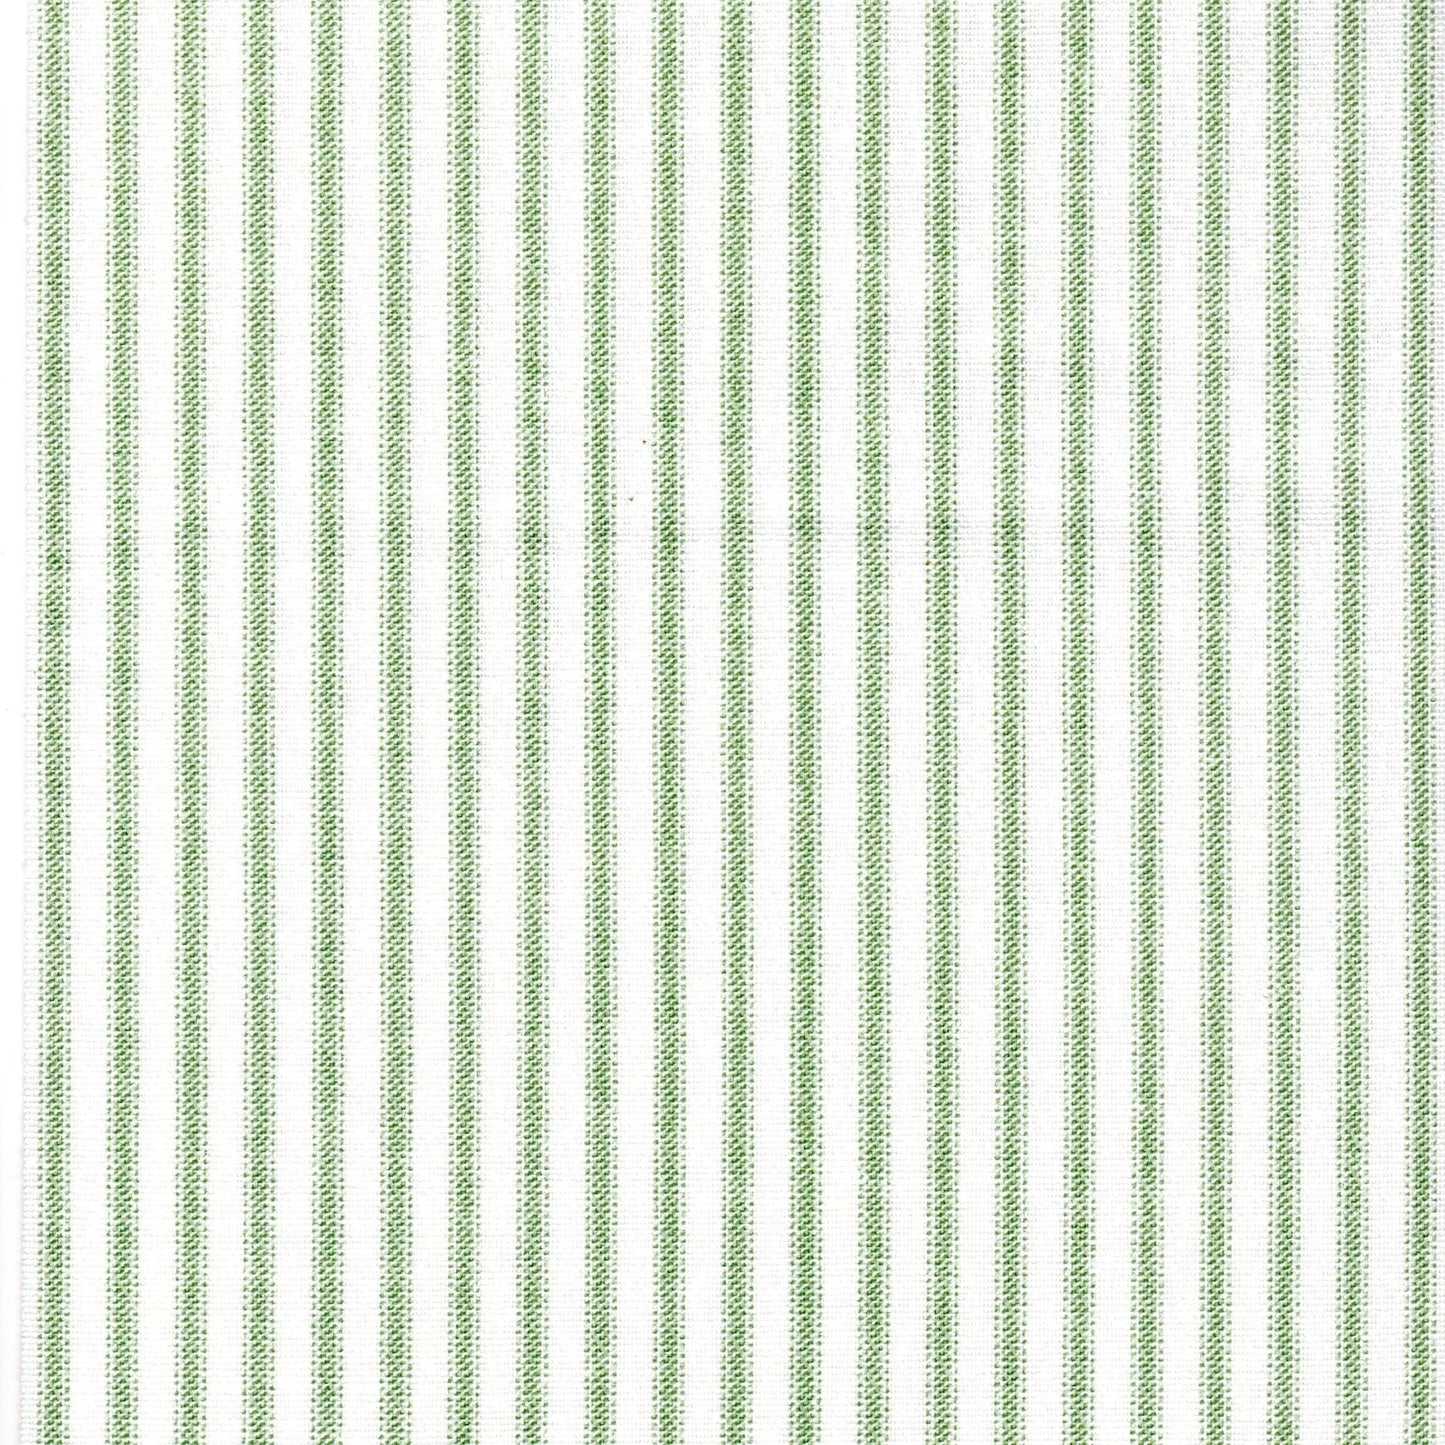 gathered bedskirt in Classic Sage Green Ticking Stripe on White